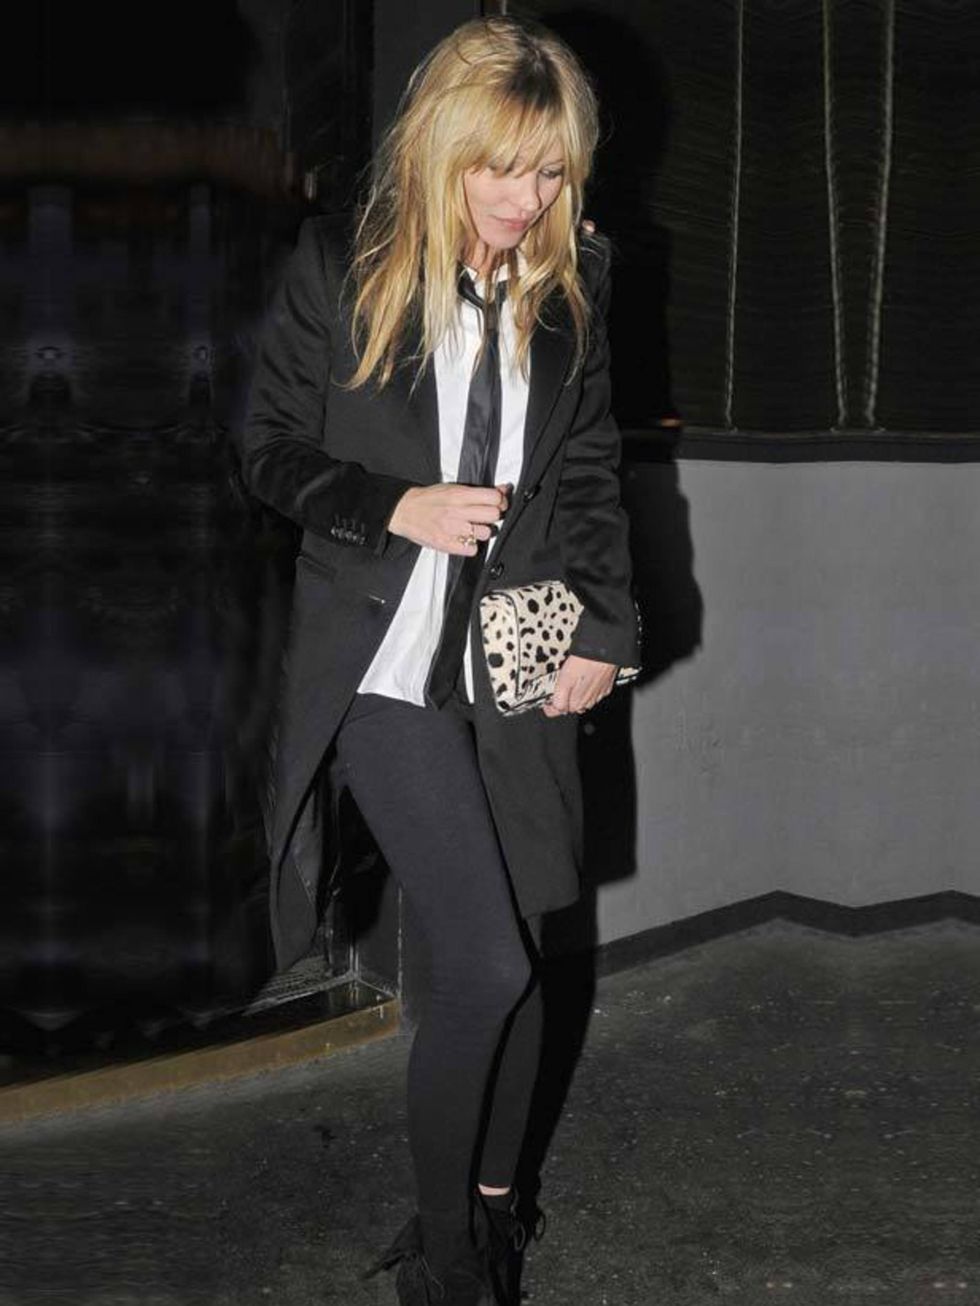 <p><a href="http://www.elleuk.com/starstyle/style-files/%28section%29/Kate-Moss">Kate Moss</a> dons shirt and tie for dinner in London, 17 December 2010</p>